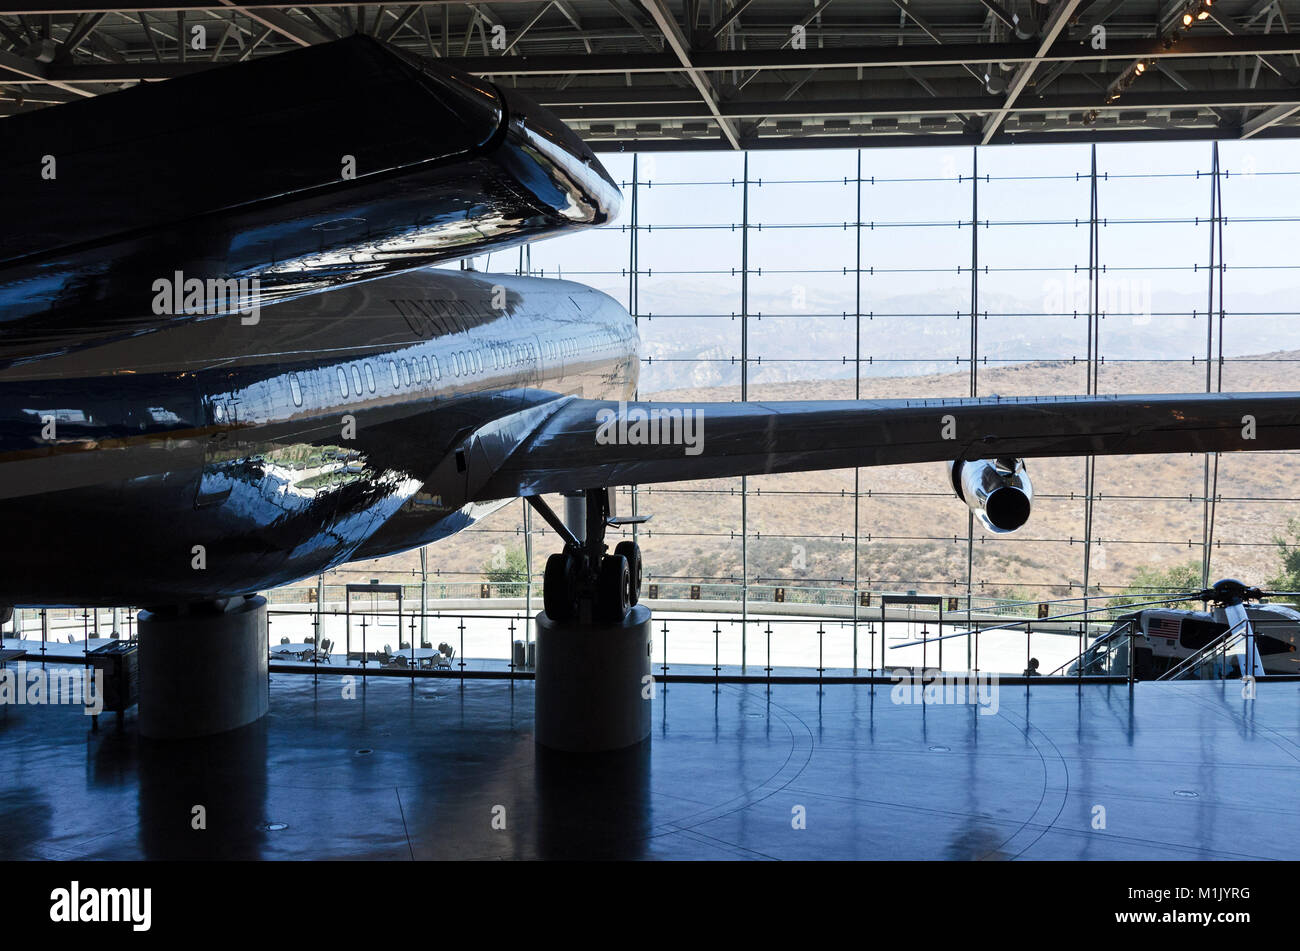 Air Force One, in der Air Force One Pavillon der Ronald Reagan Presidential Library, Simi Valley, Kalifornien (Los Angeles). Stockfoto